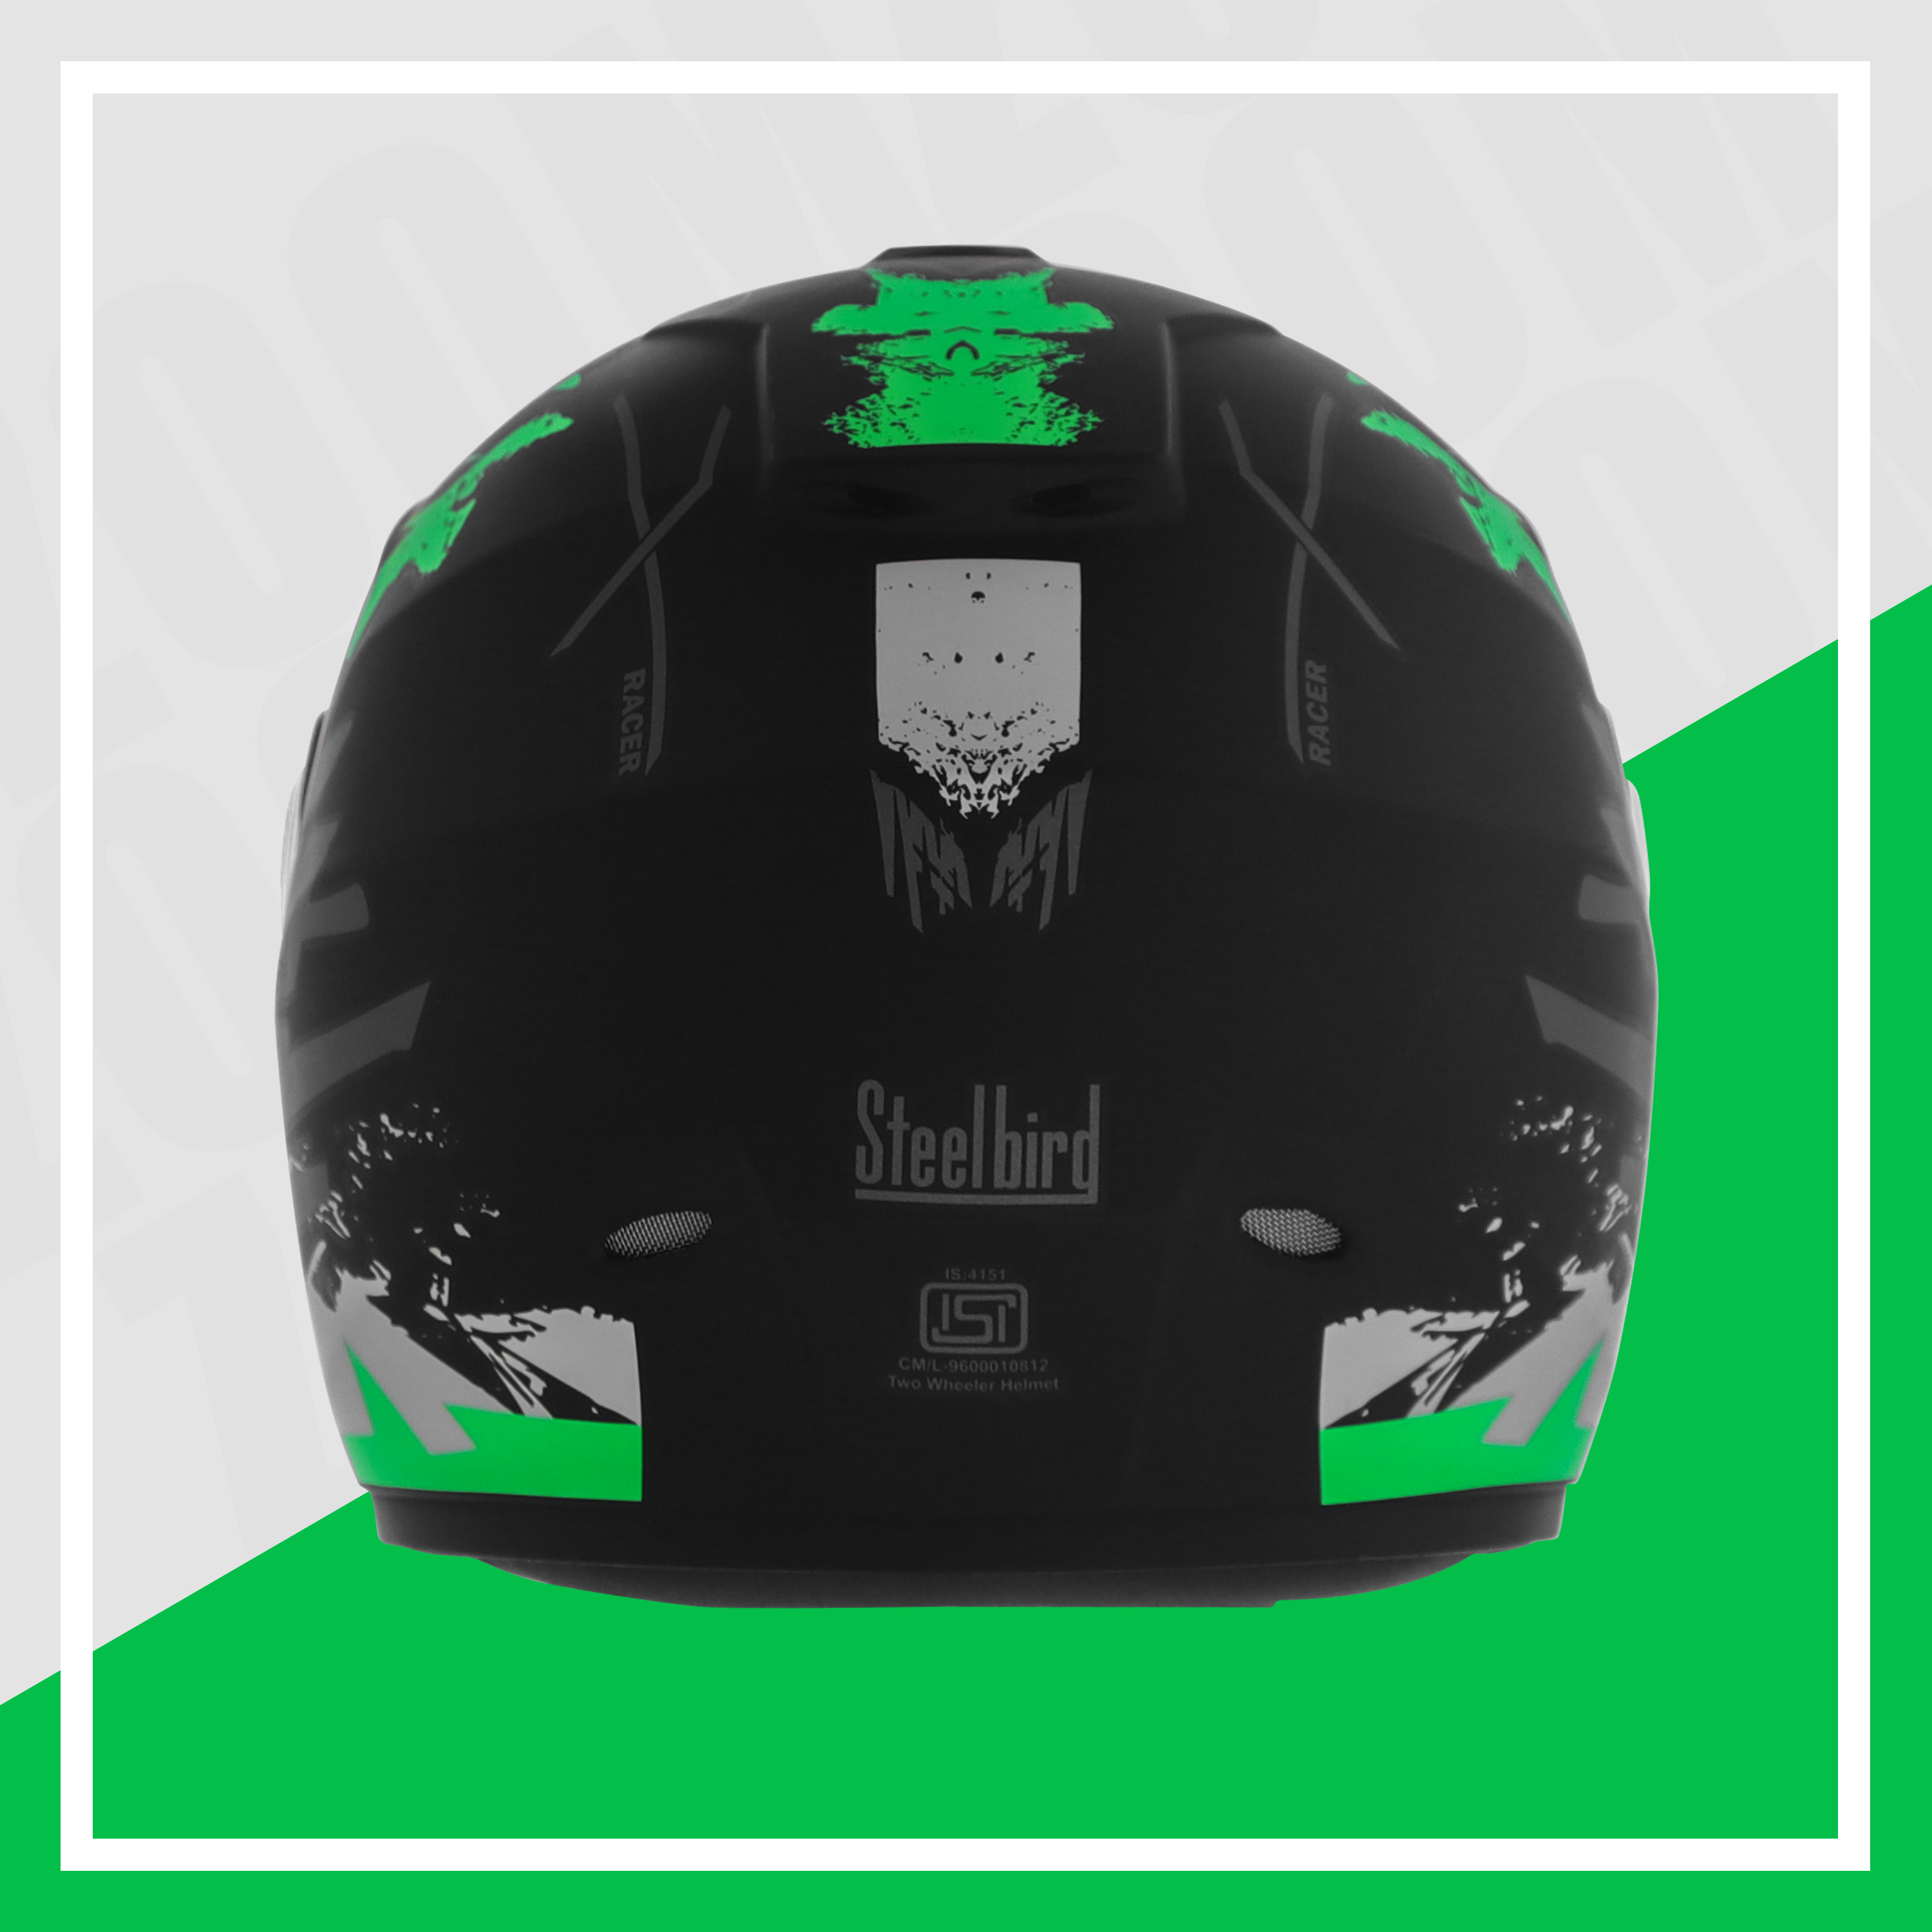 Steelbird SBH-11 Zoom Racer ISI Certified Full Face Graphic Helmet For Men And Women (Glossy Black Green With Chrome Silver Visor)